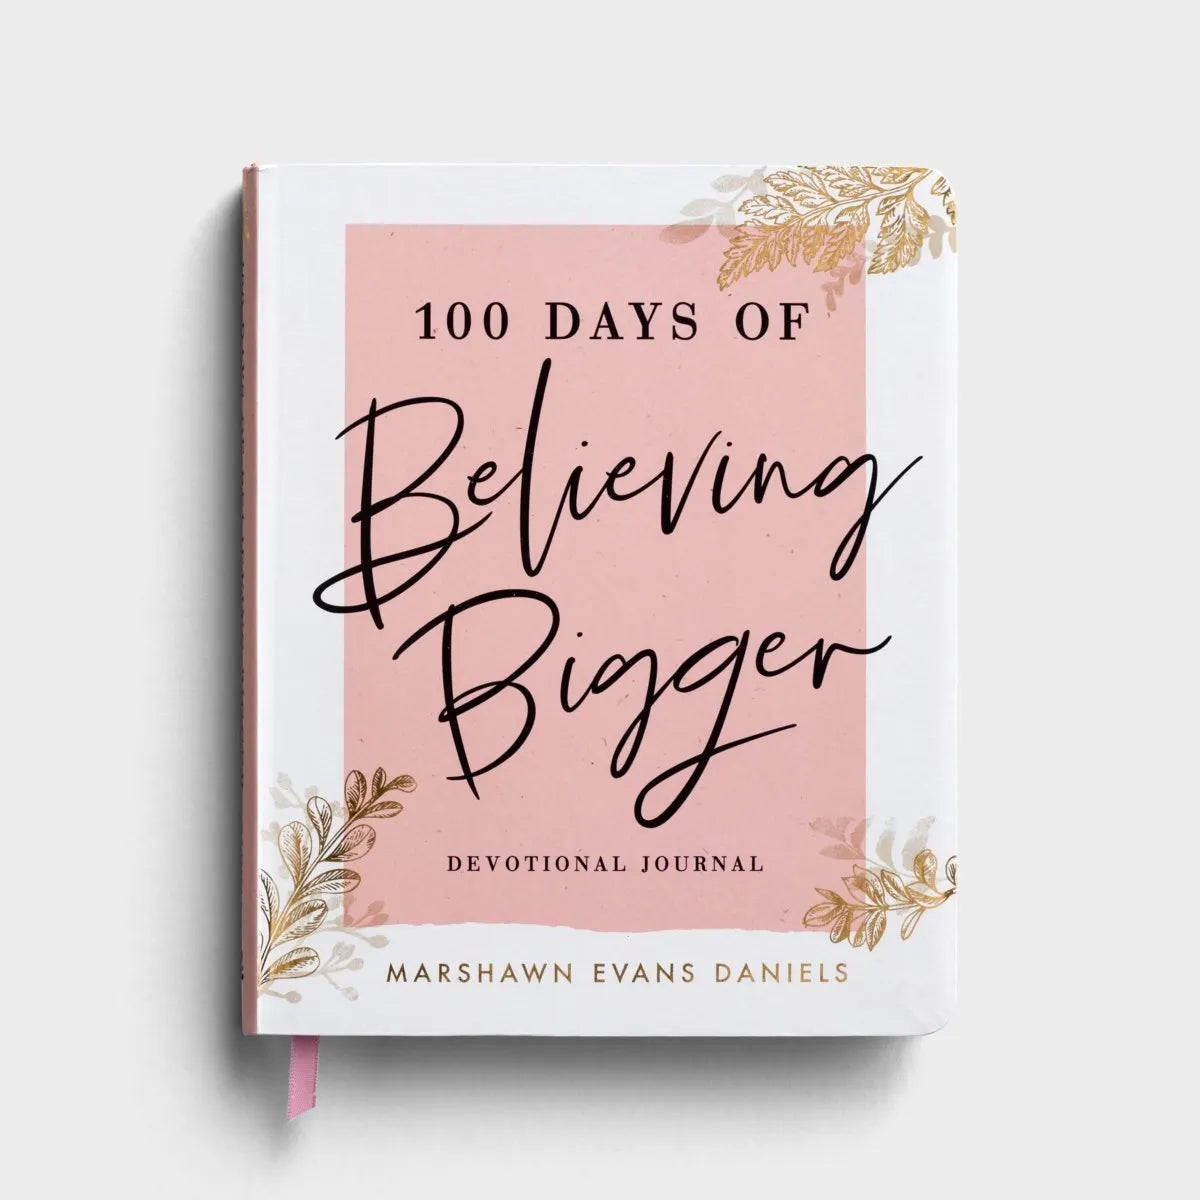 Load image into Gallery viewer, Marshawn Evans Daniels - 100 Days of Believing Bigger - Devotional Journal and Prayers
